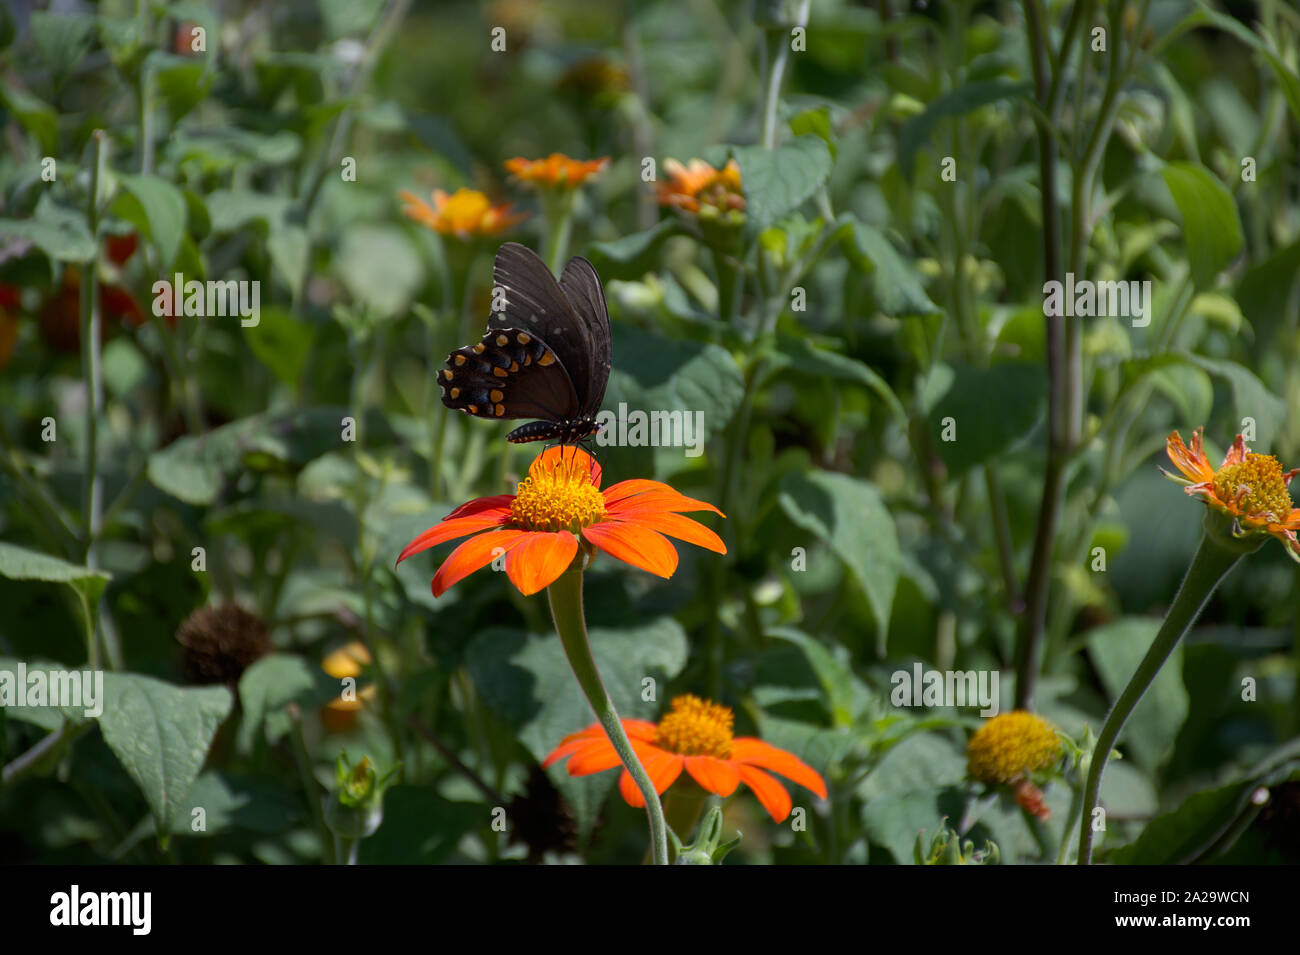 Morph Swallowtail perched on Mexican Sunflower profile view Stock Photo